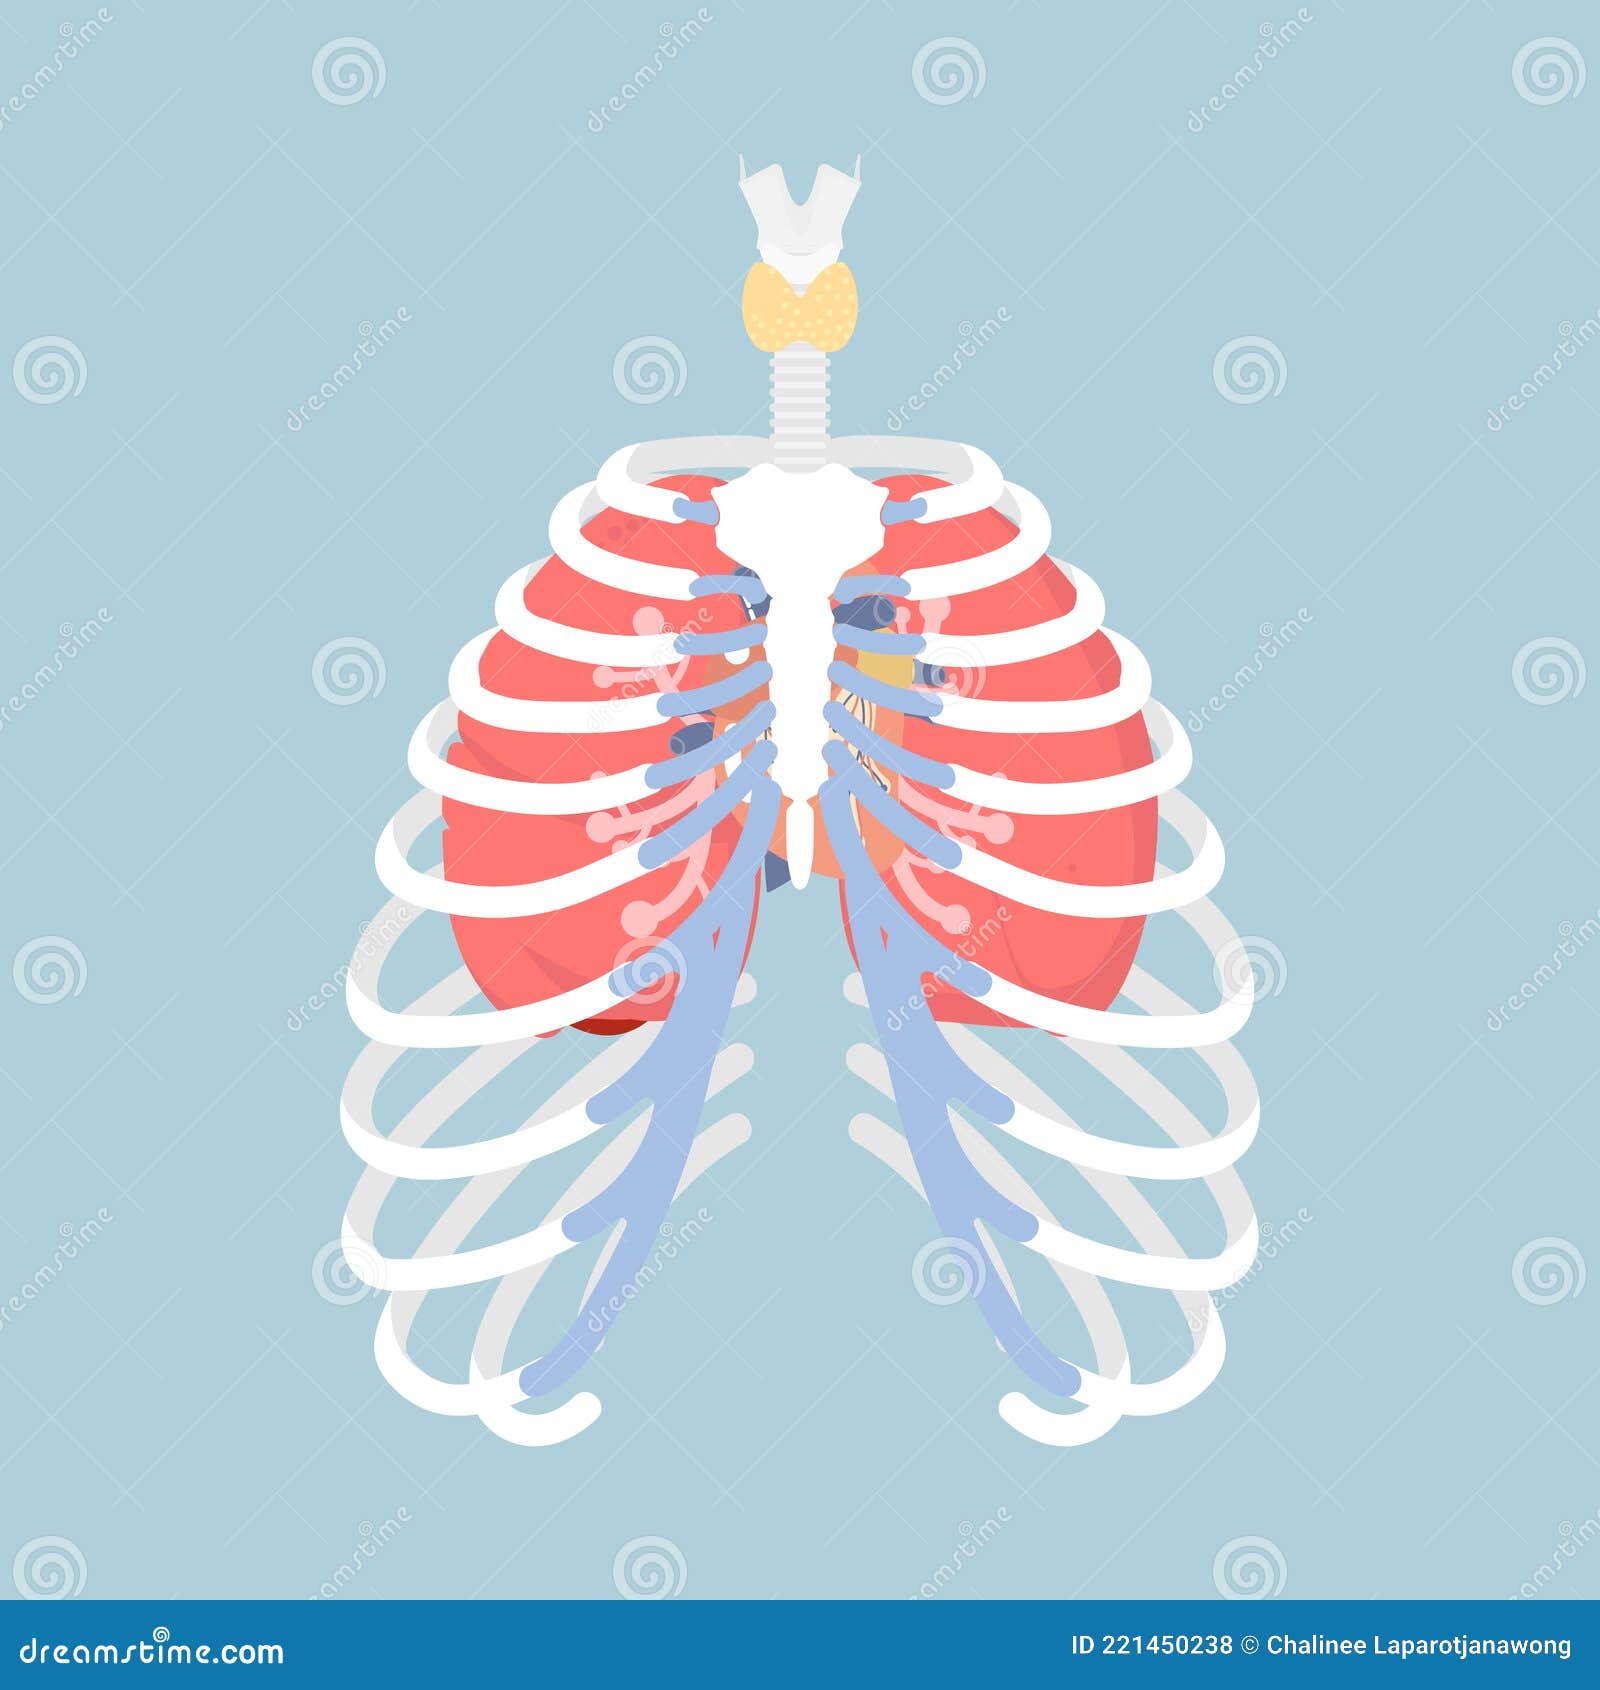 Anatomy Of Human Rib Cage With Lungs And Human Heart Internal Organs Body Part Orthopedic